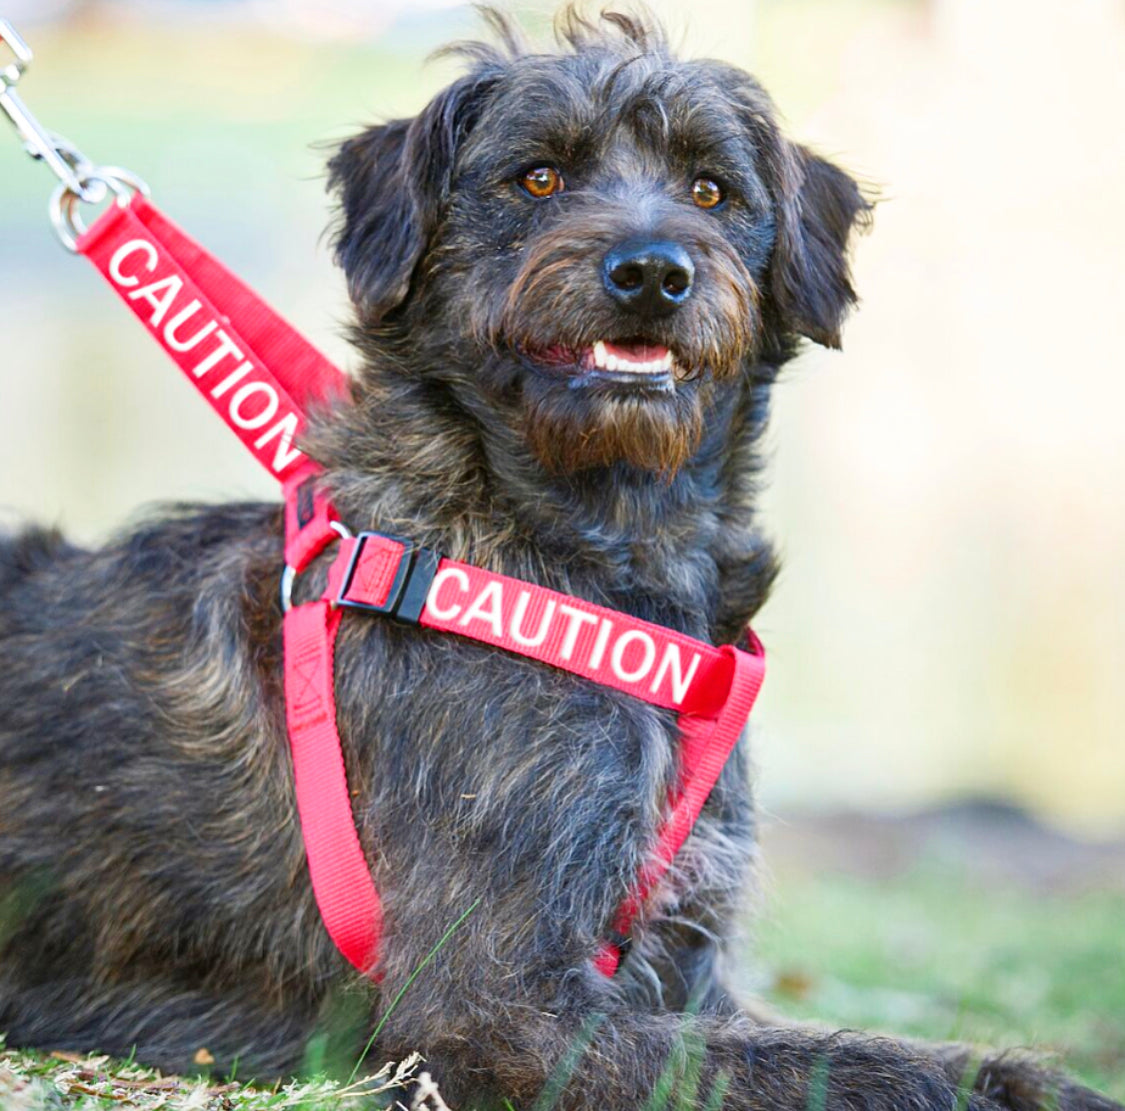 Dexil Friendly Dog Collars Red CAUTION L/XL adjustable Strap Harness